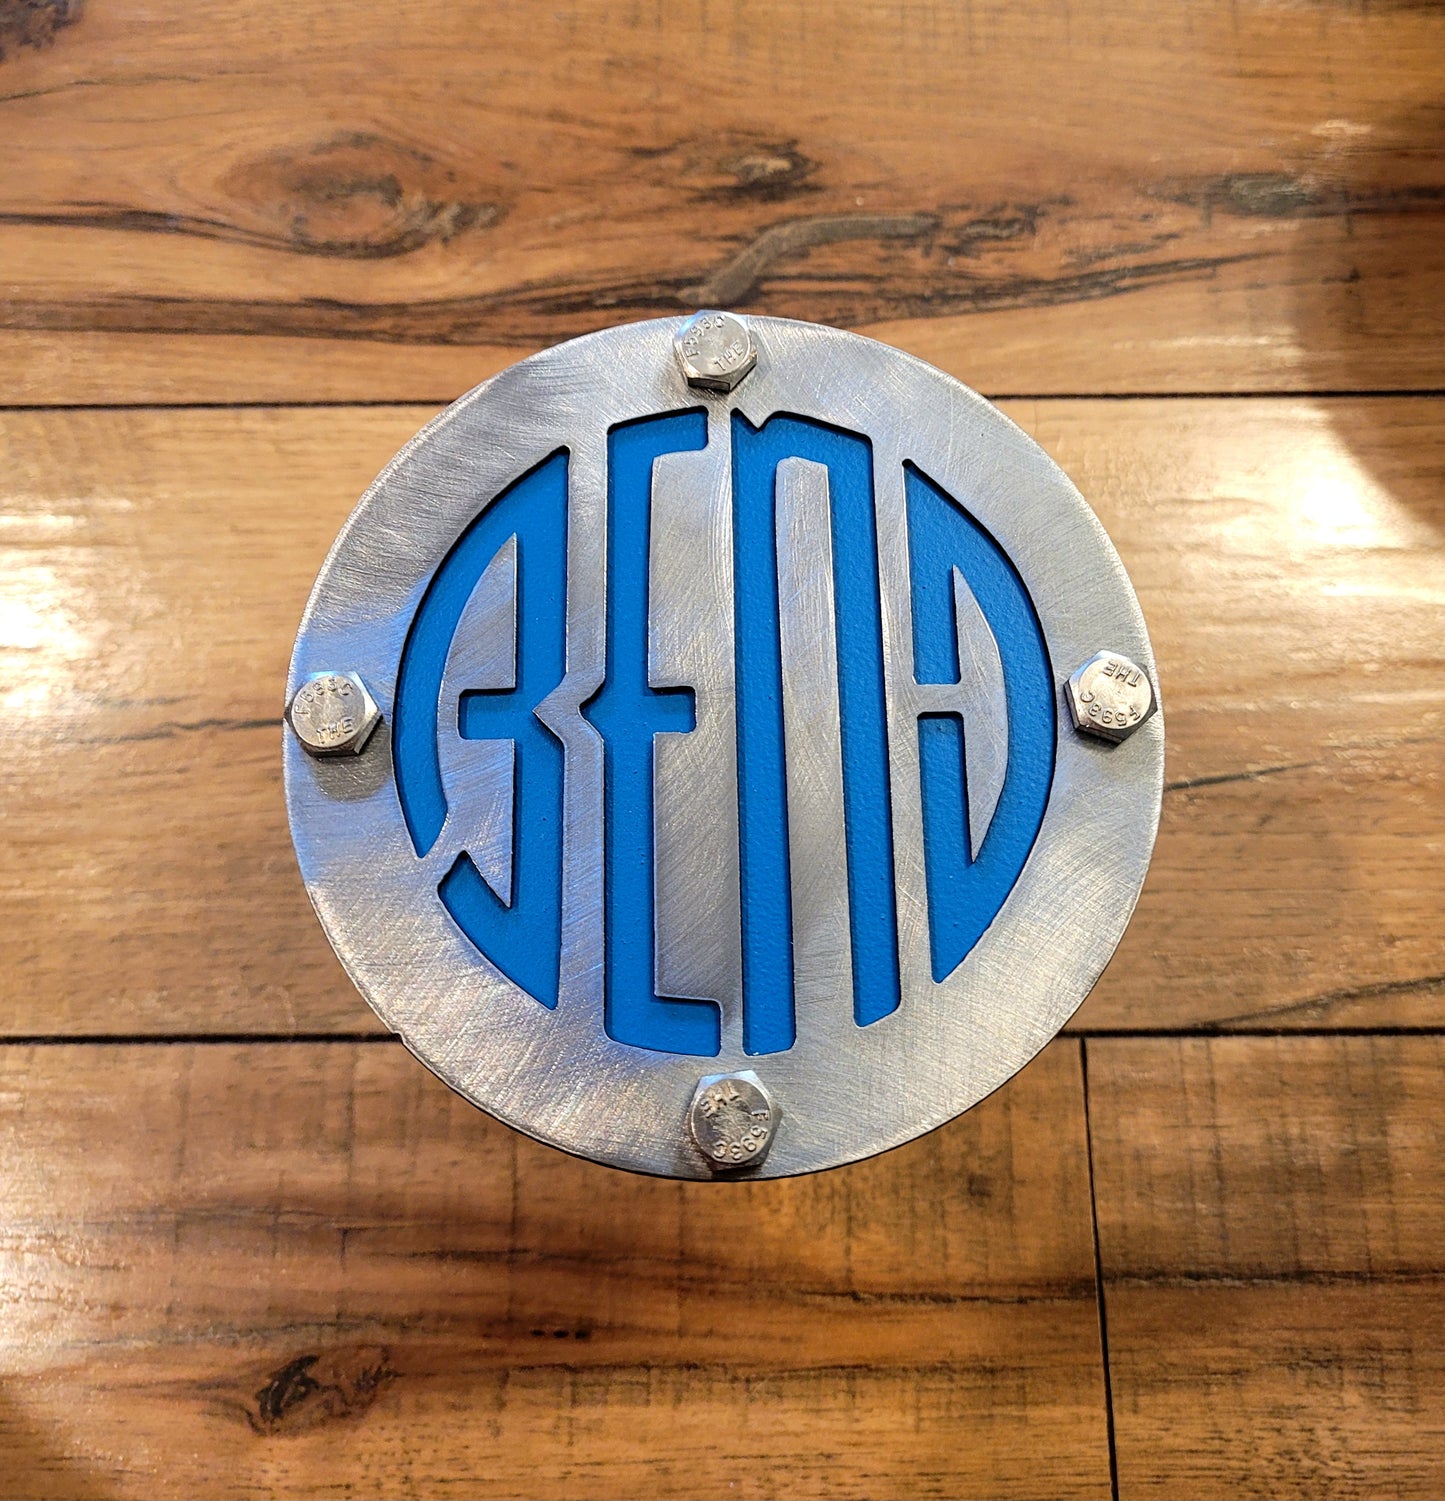 3 - Beautiful Bend hitch covers